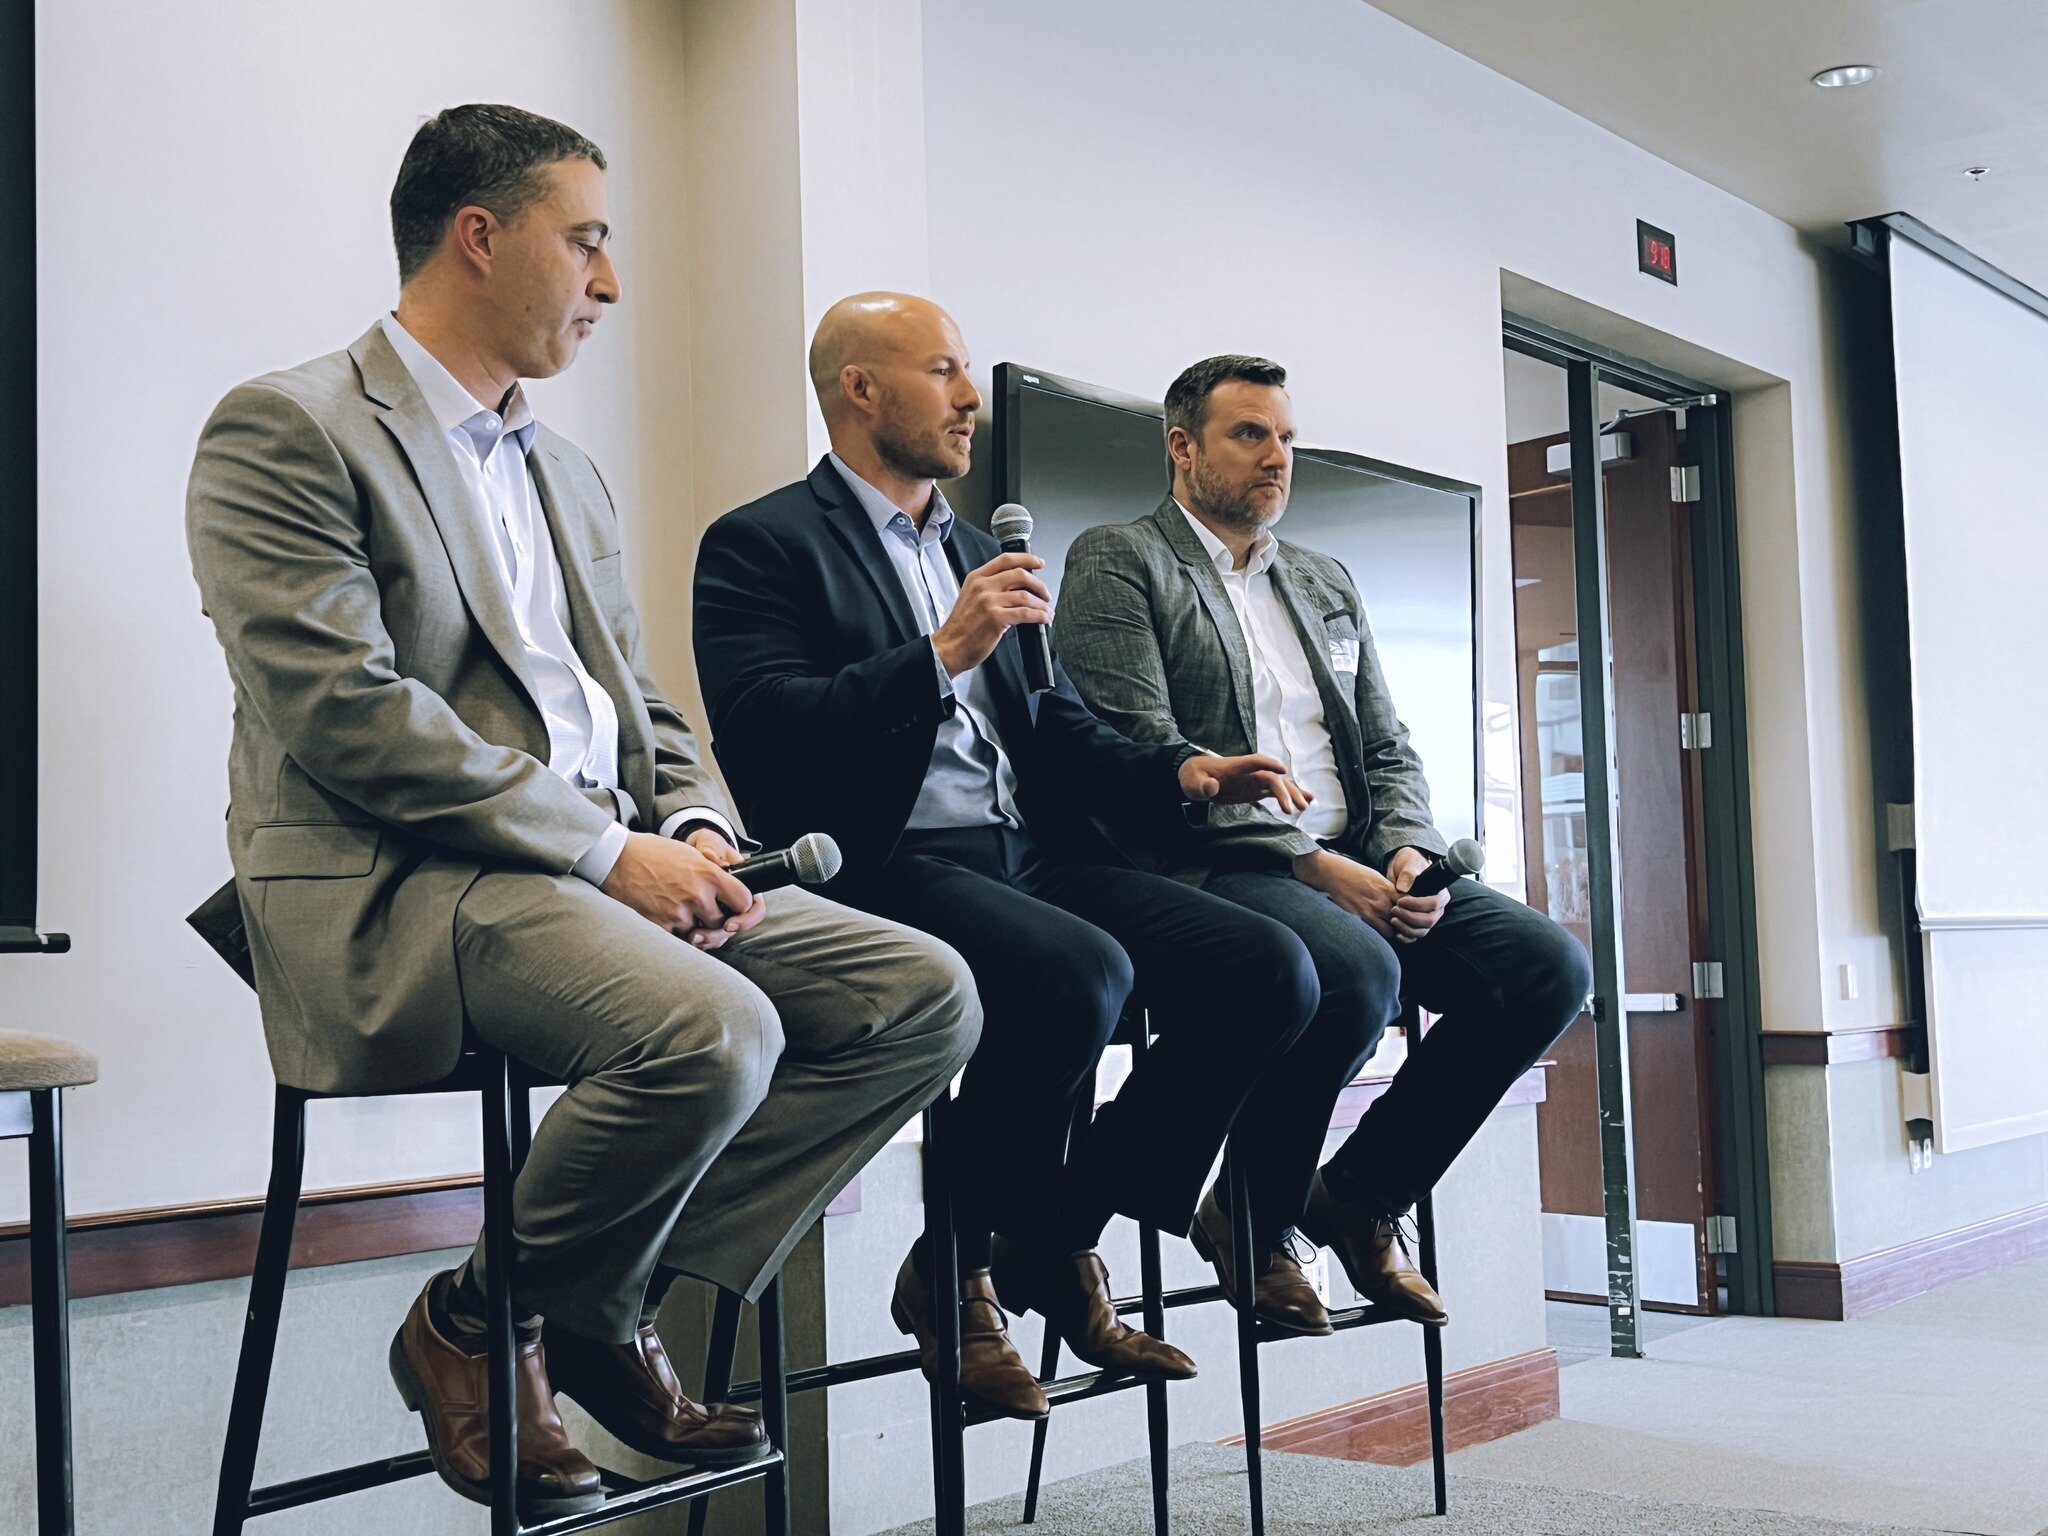 Way to go, Ryan! He did a phenomenal job speaking at Traverse Connect's panel on 360 Degrees of Cybersecurity. Ryan and our other panelists offered guidance and recommendations for companies of all sizes on how to navigate the challenges of securing 